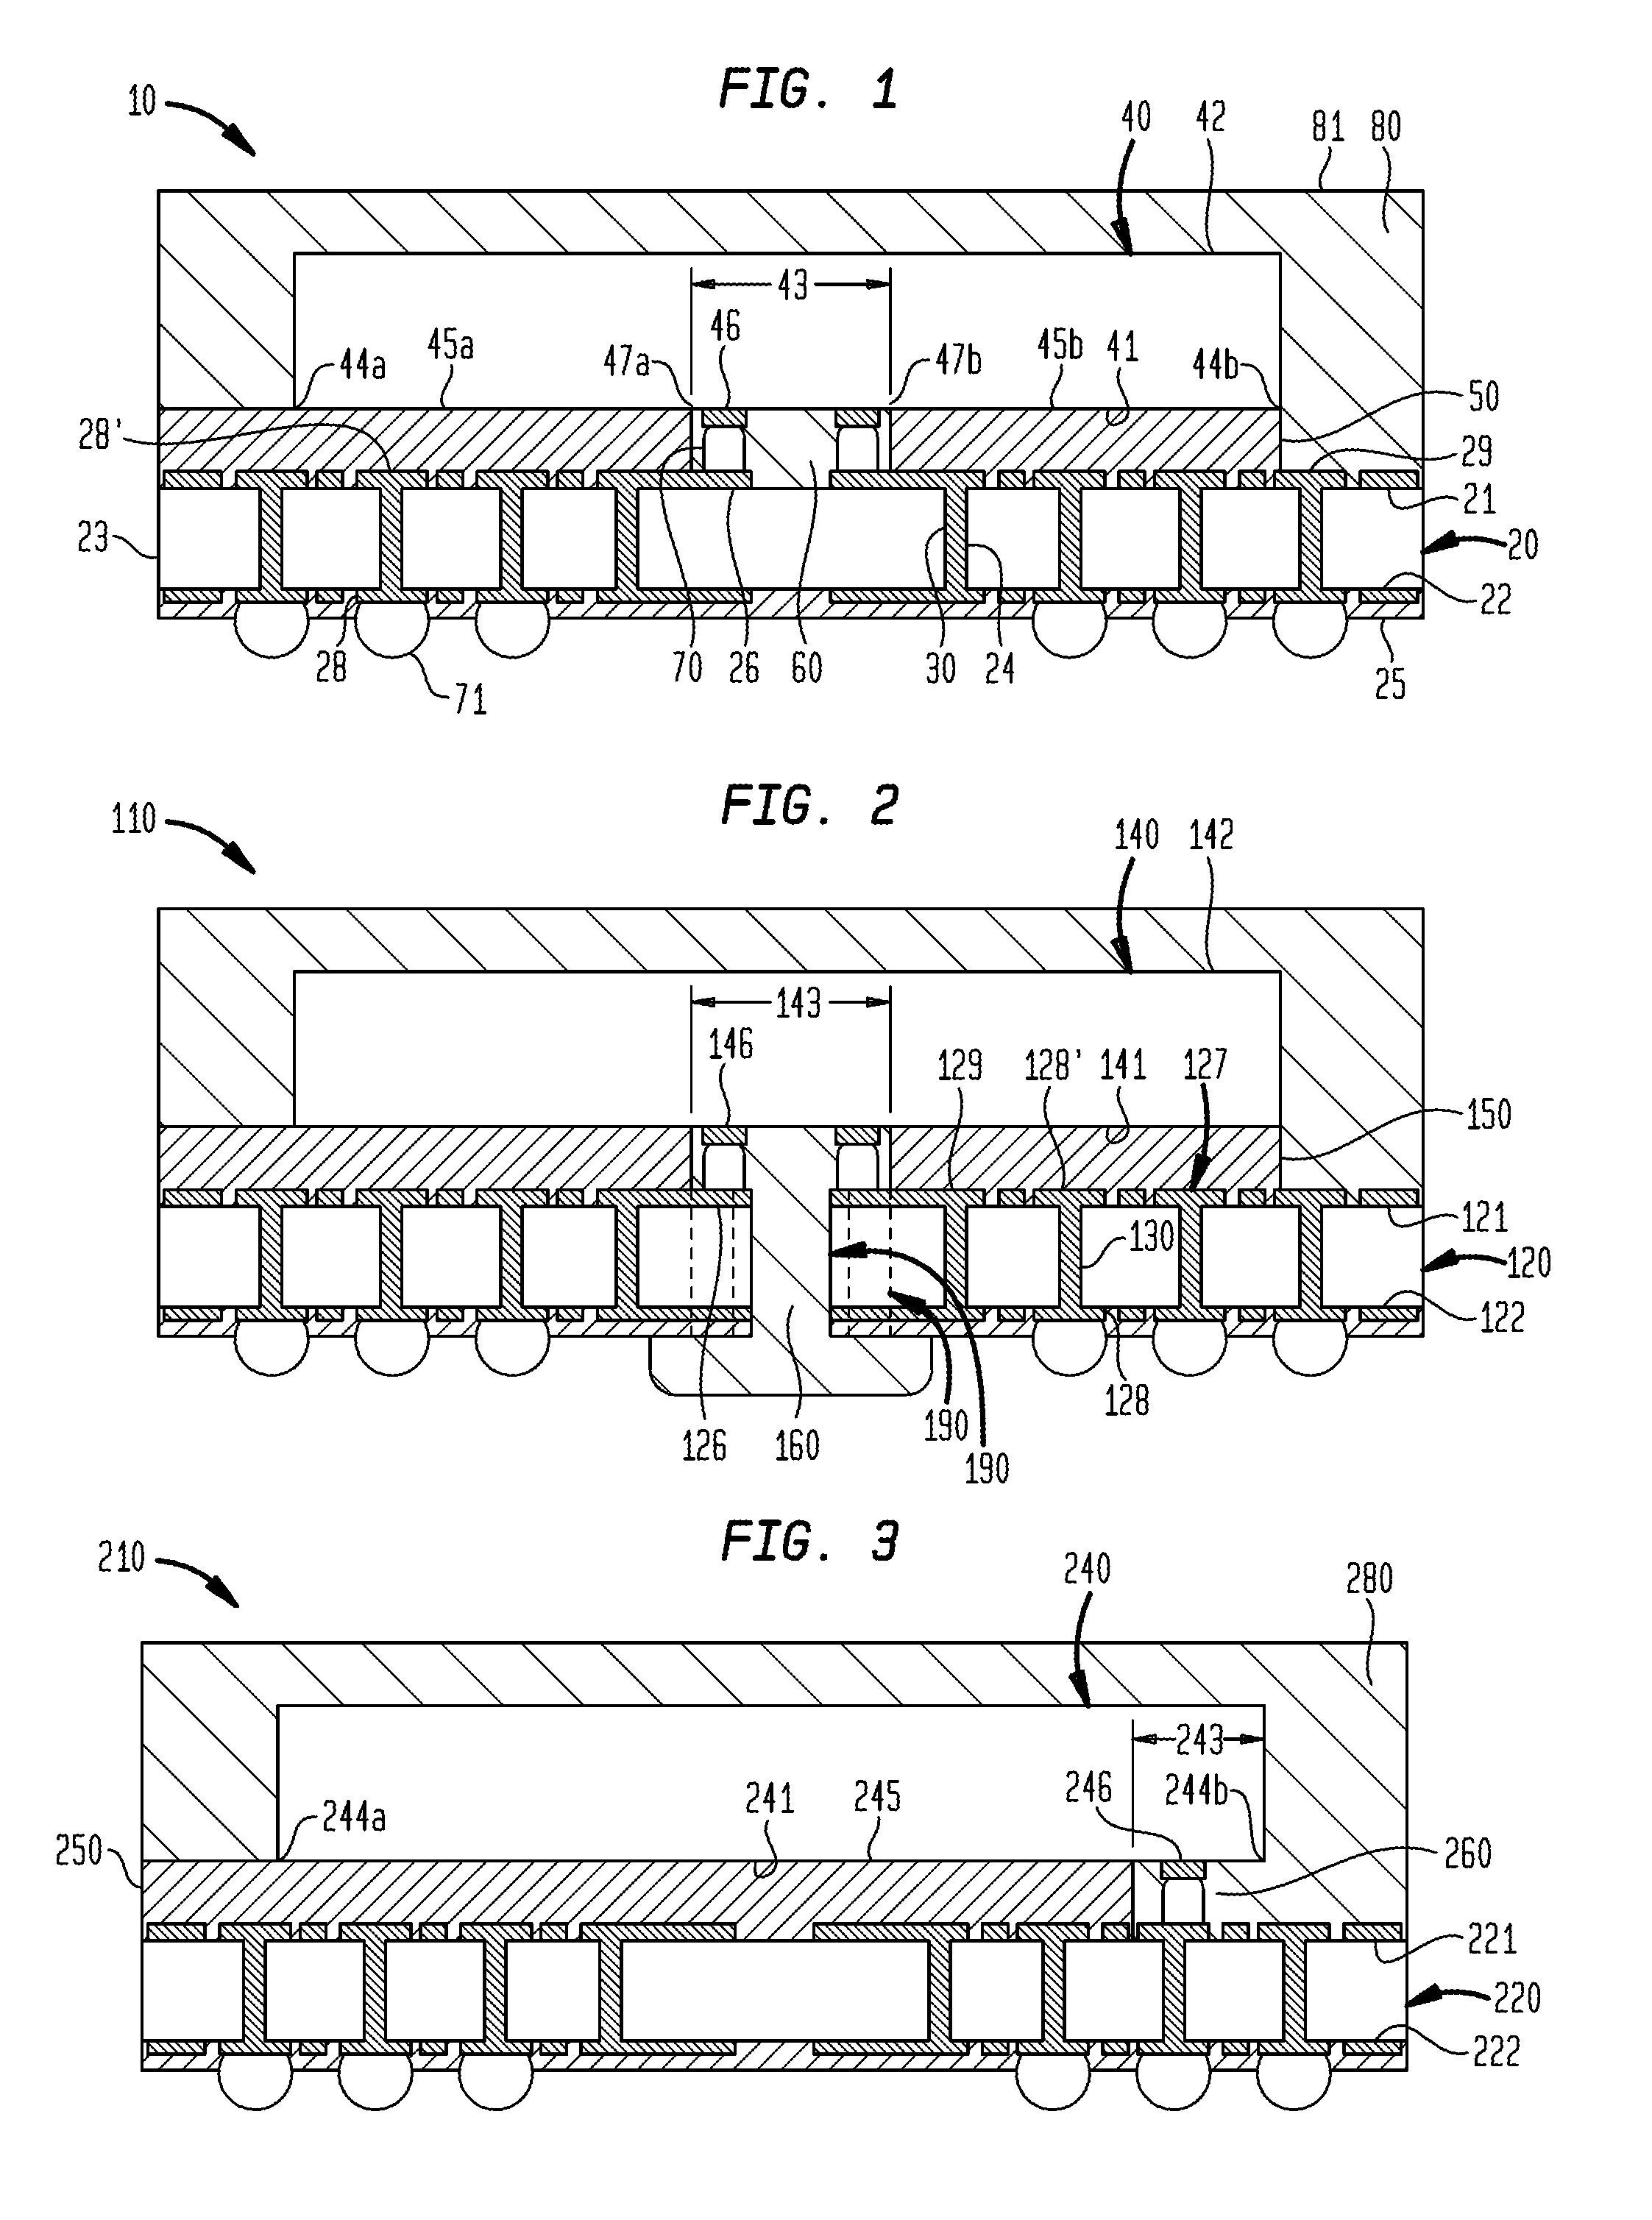 Flip chip package for DRAM with two underfill materials